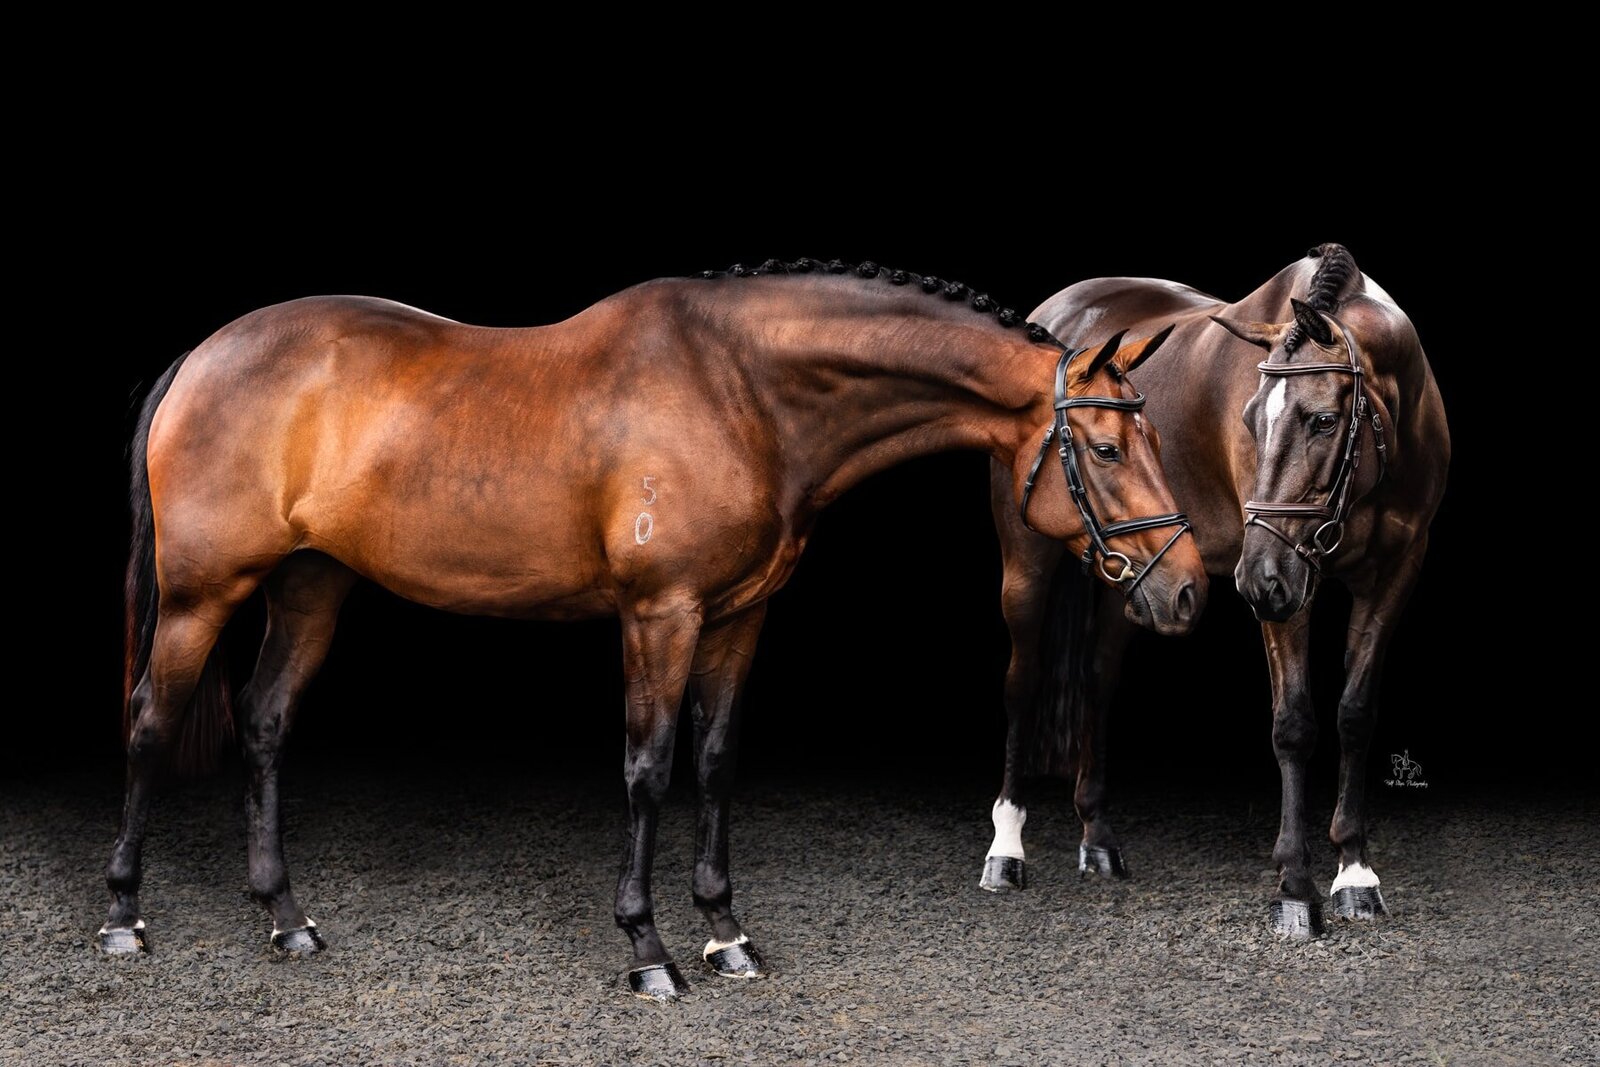 (33) Two horses in black background photoshoot